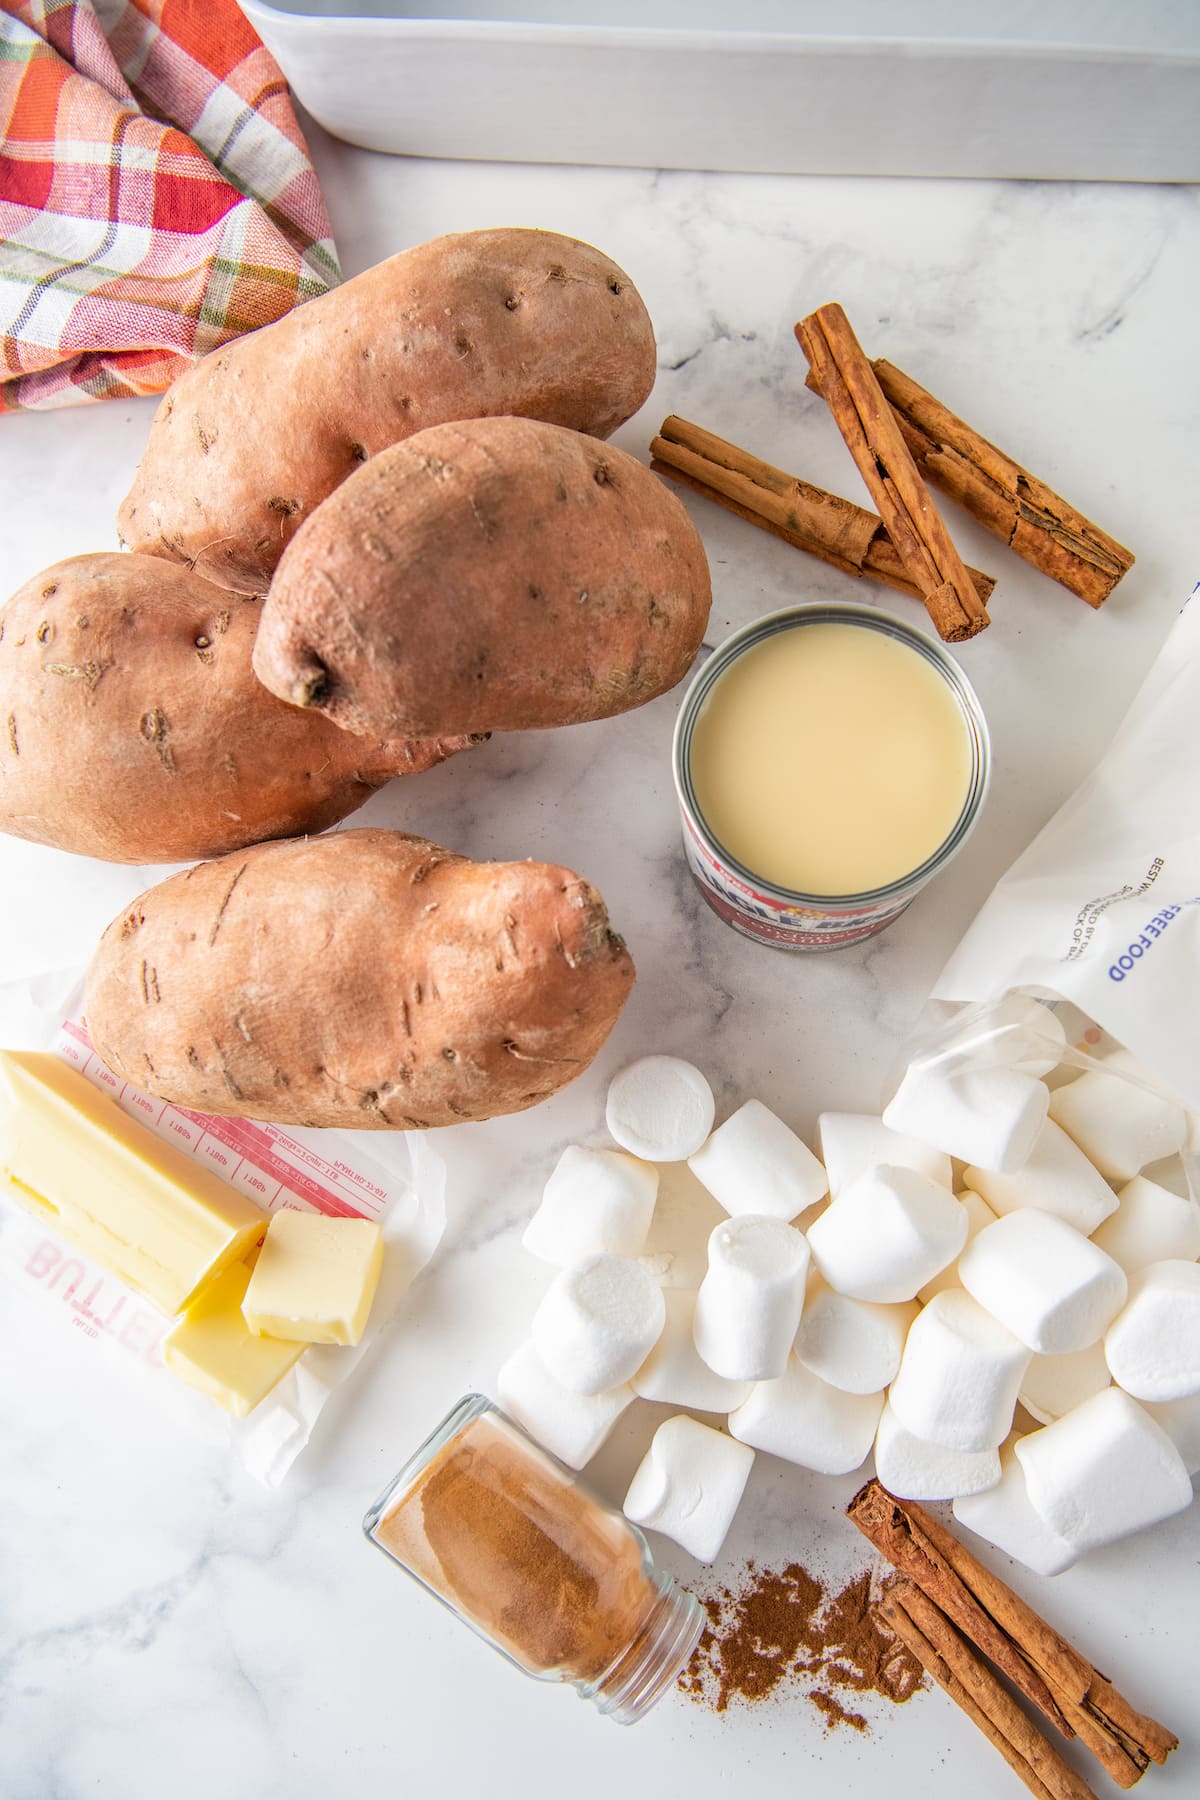 ingredients to make sweet potato casserole like sweet potatoes, condensed milk, butter, cinnamon, and marshmallow,